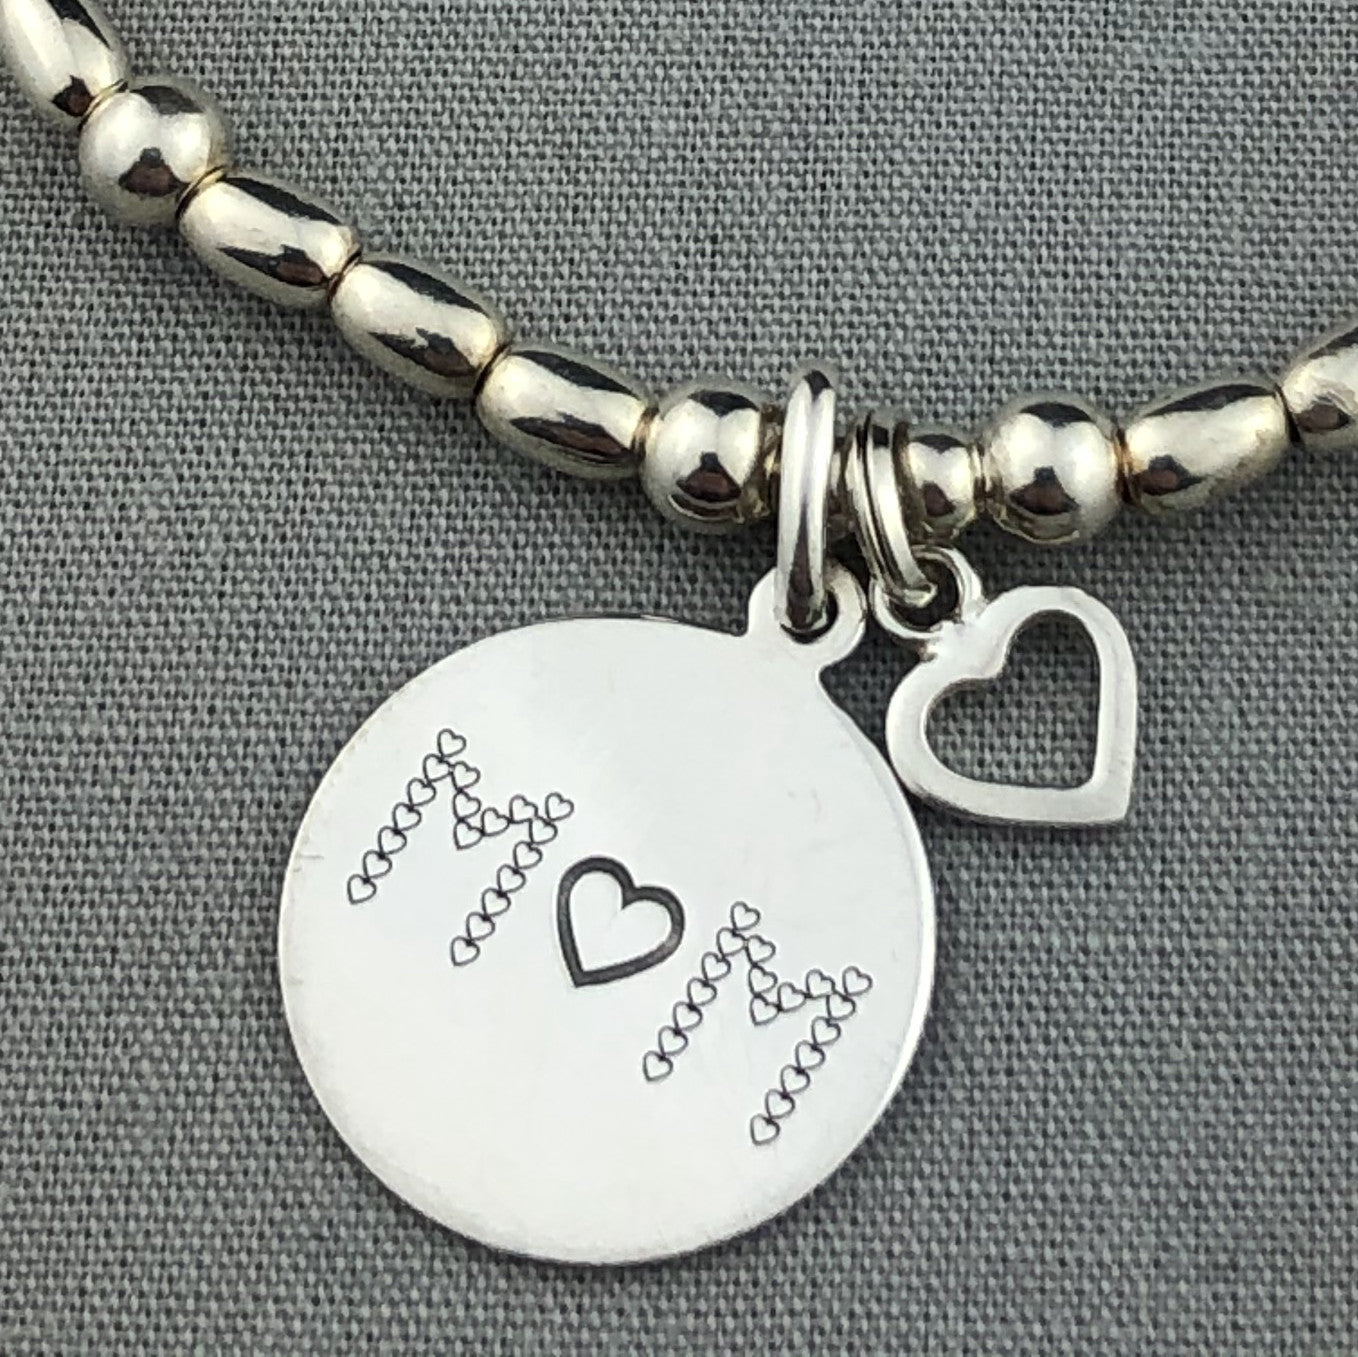 Closeup of "Mum" sterling silver hand-made women's stacking charm bracelet by My Silver Wish